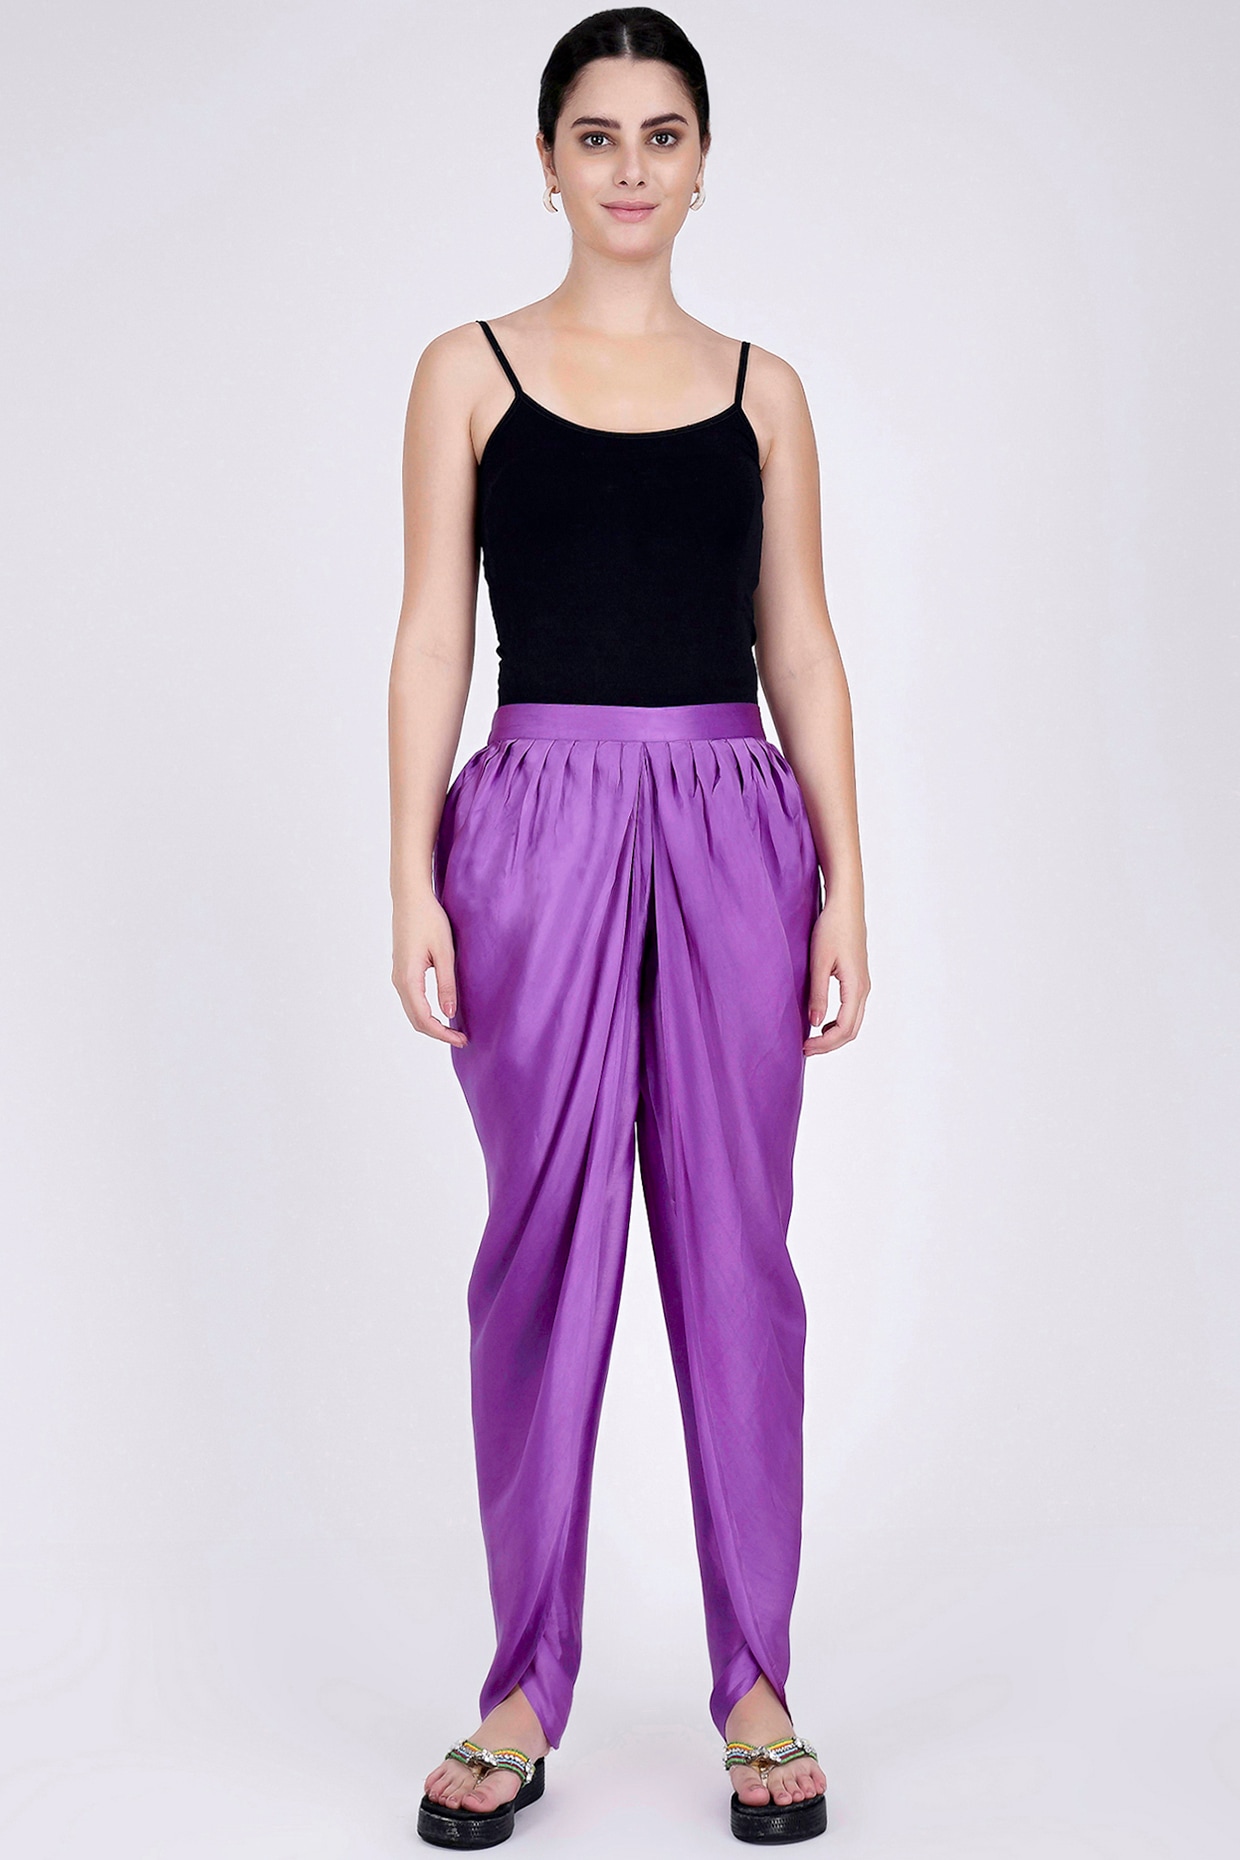 Find Out Where To Get The Pants  Fashion Satin pants Stylish outfits